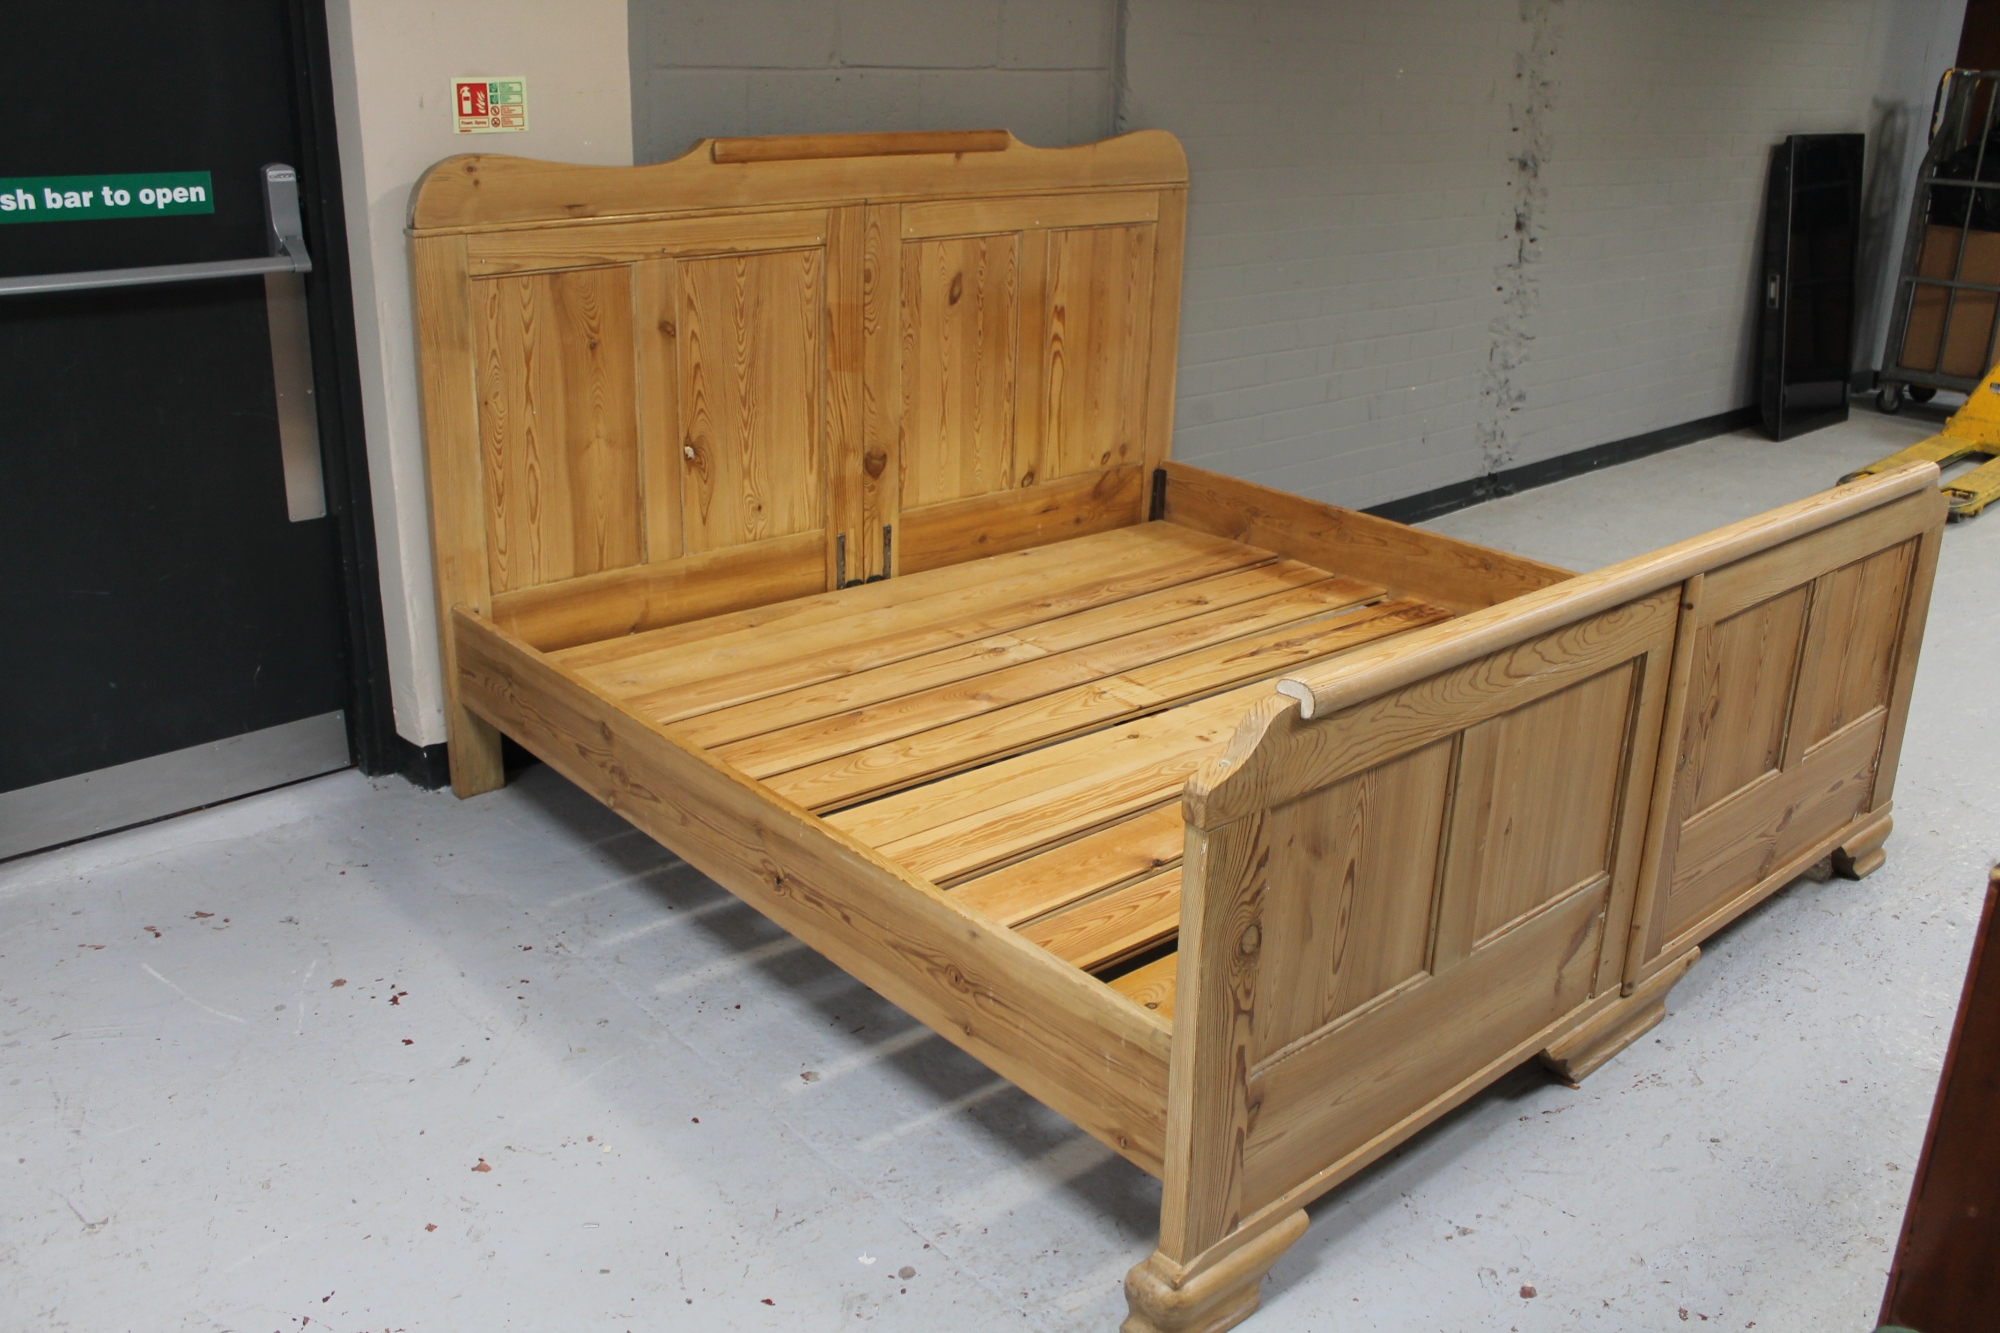 A 6' pine bed frame